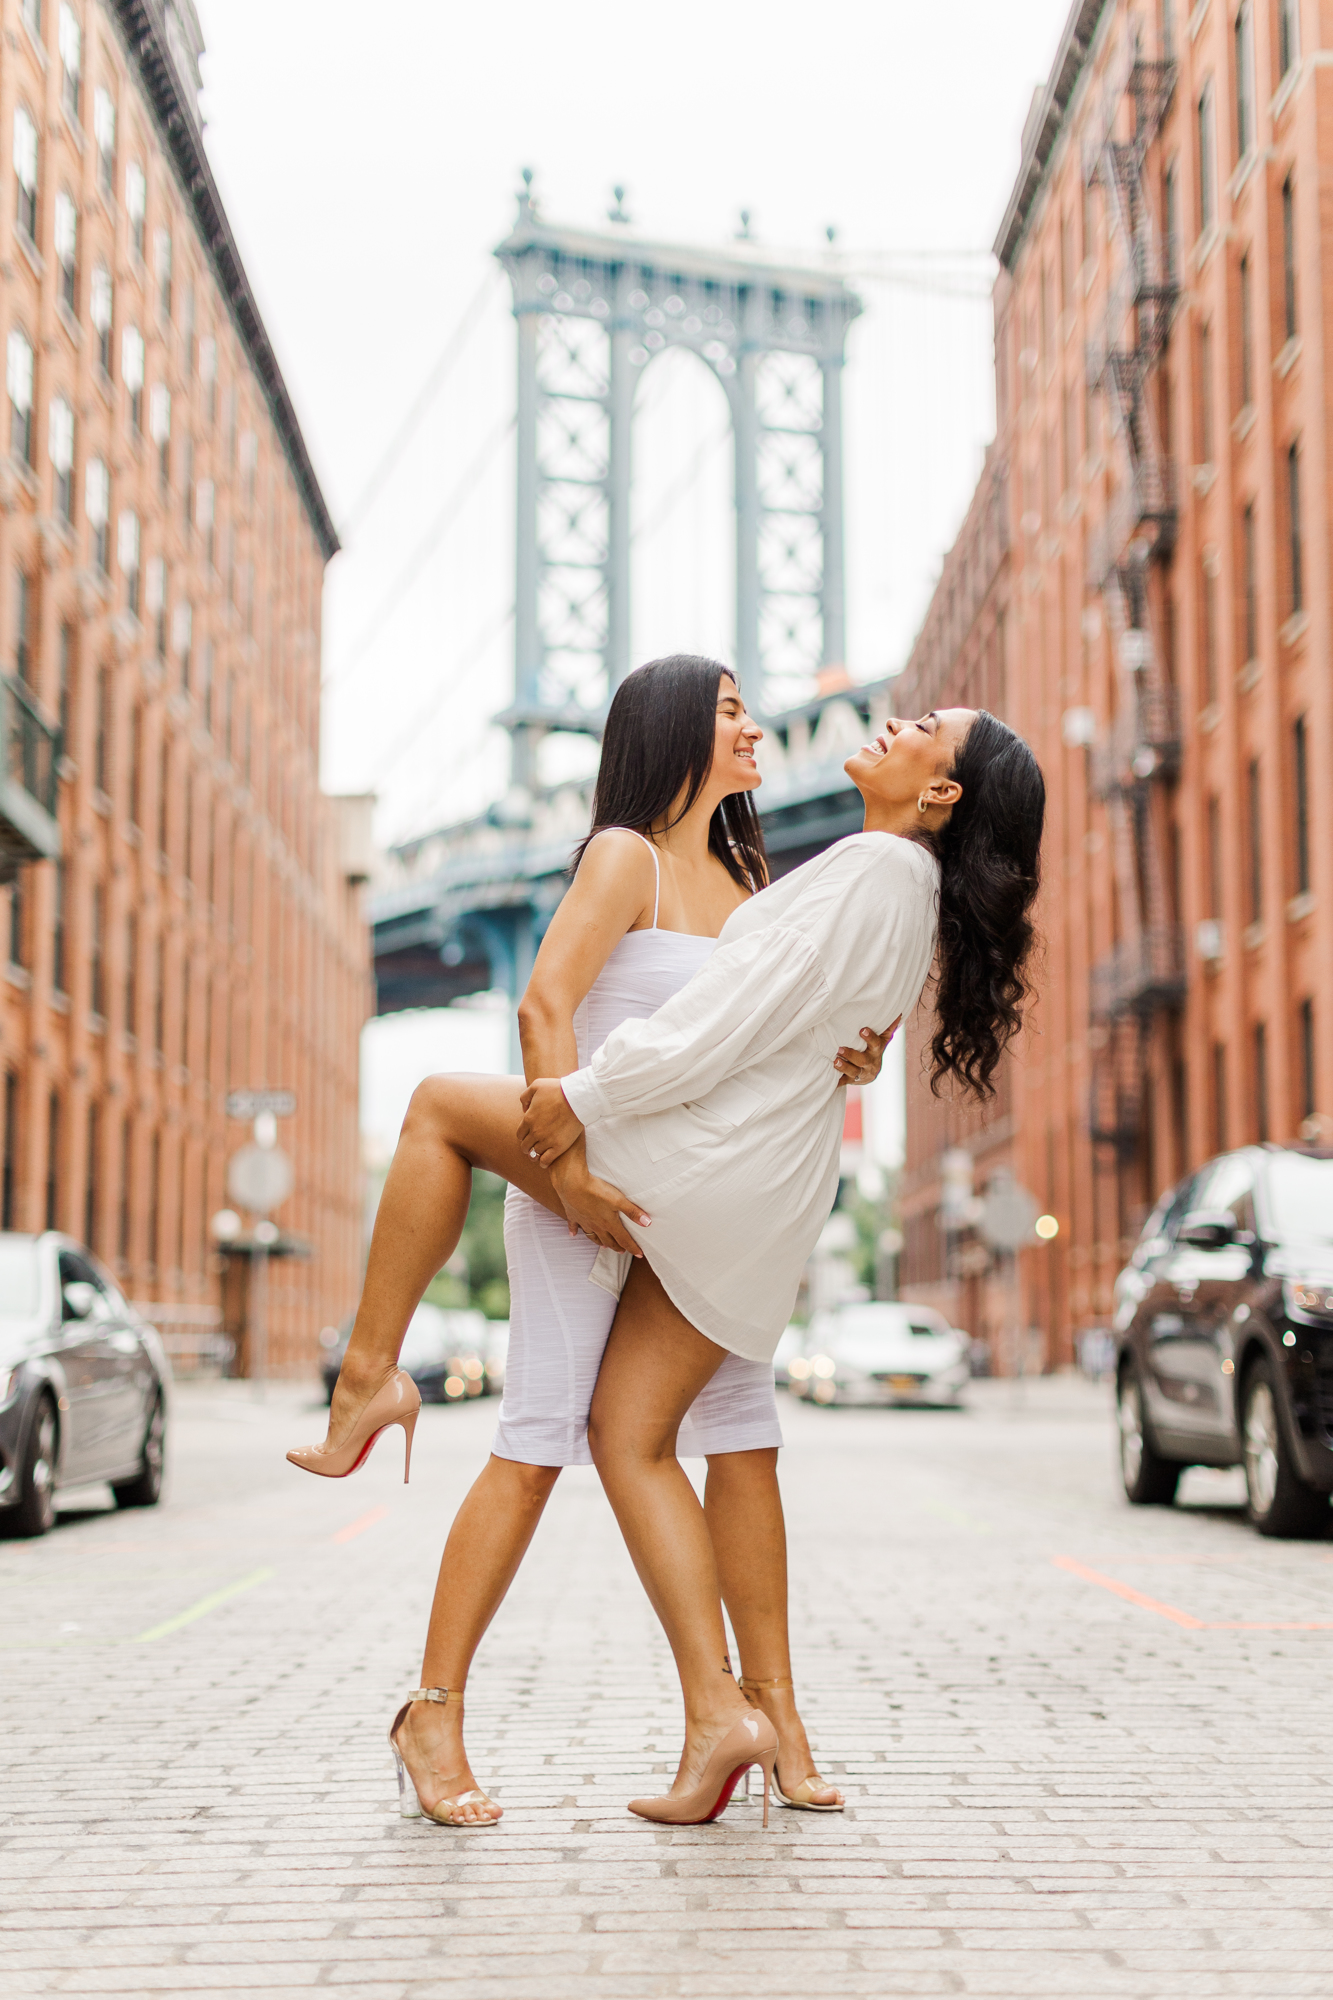 Special Pose Ideas for your Engagement Session